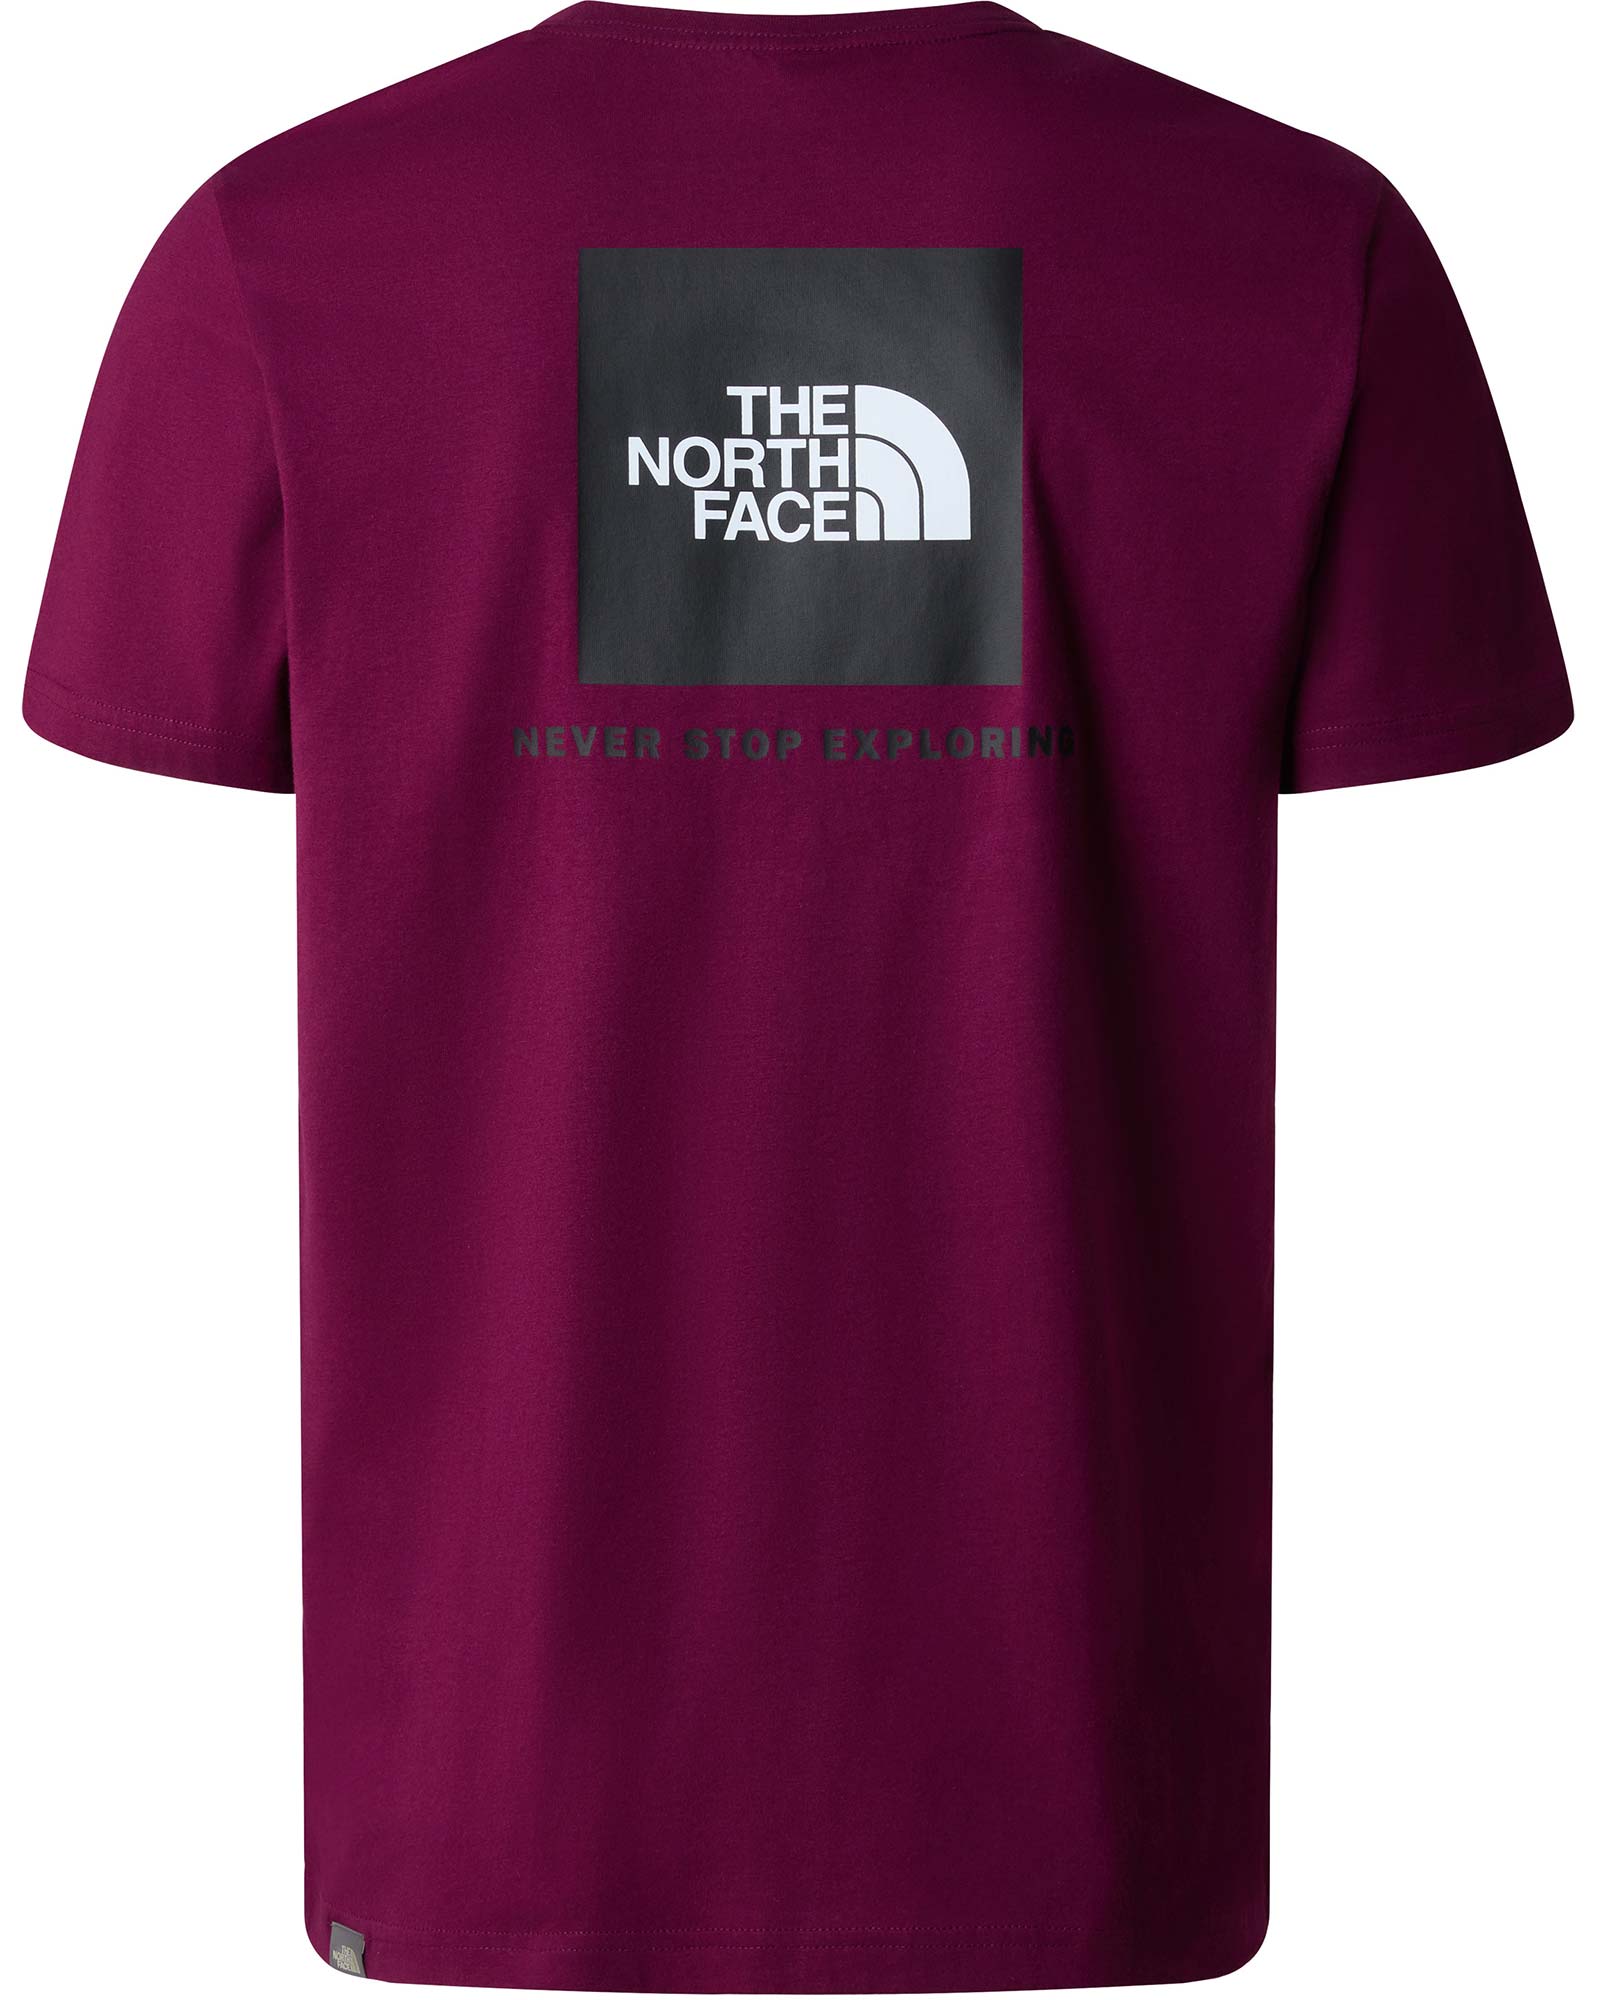 The North Face Red Box Men’s T Shirt - Boysenberry L